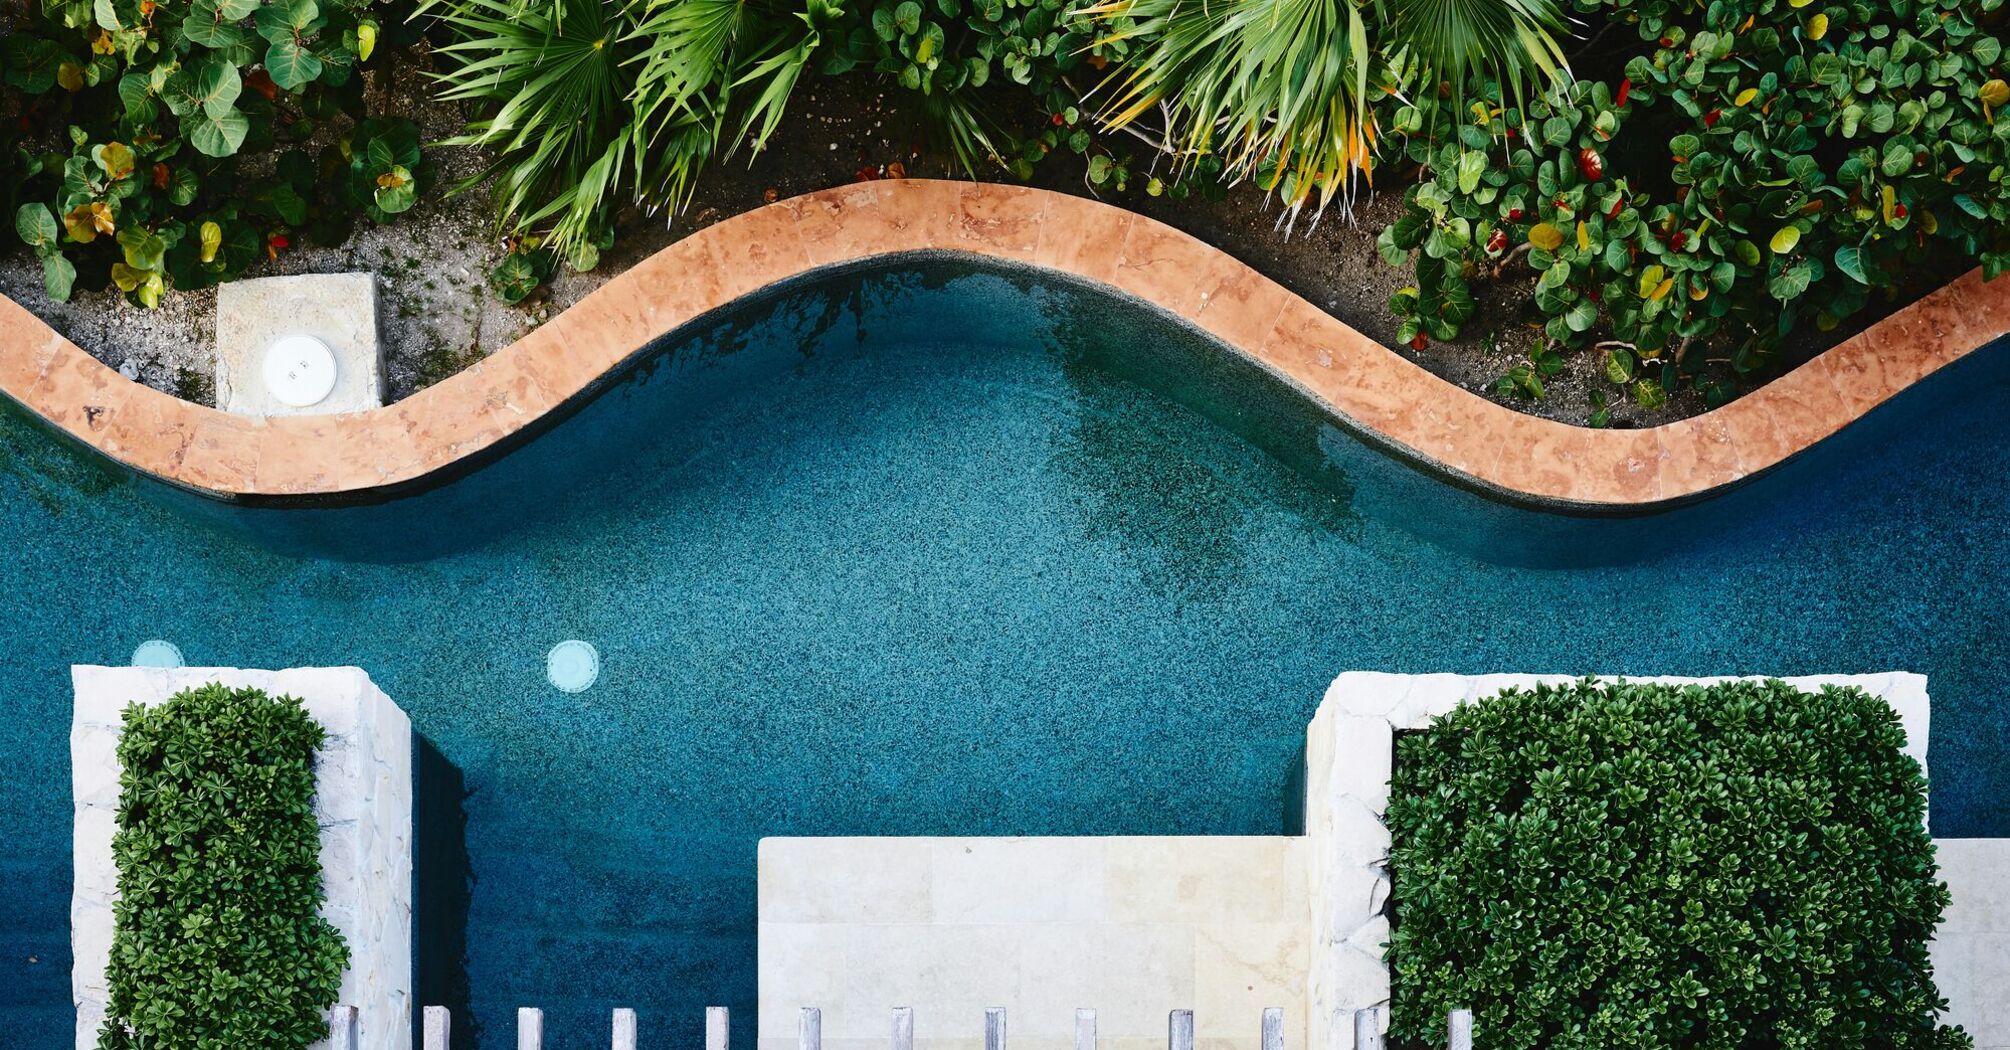 Aerial view of a curvy swimming pool surrounded by lush greenery and deck chairs